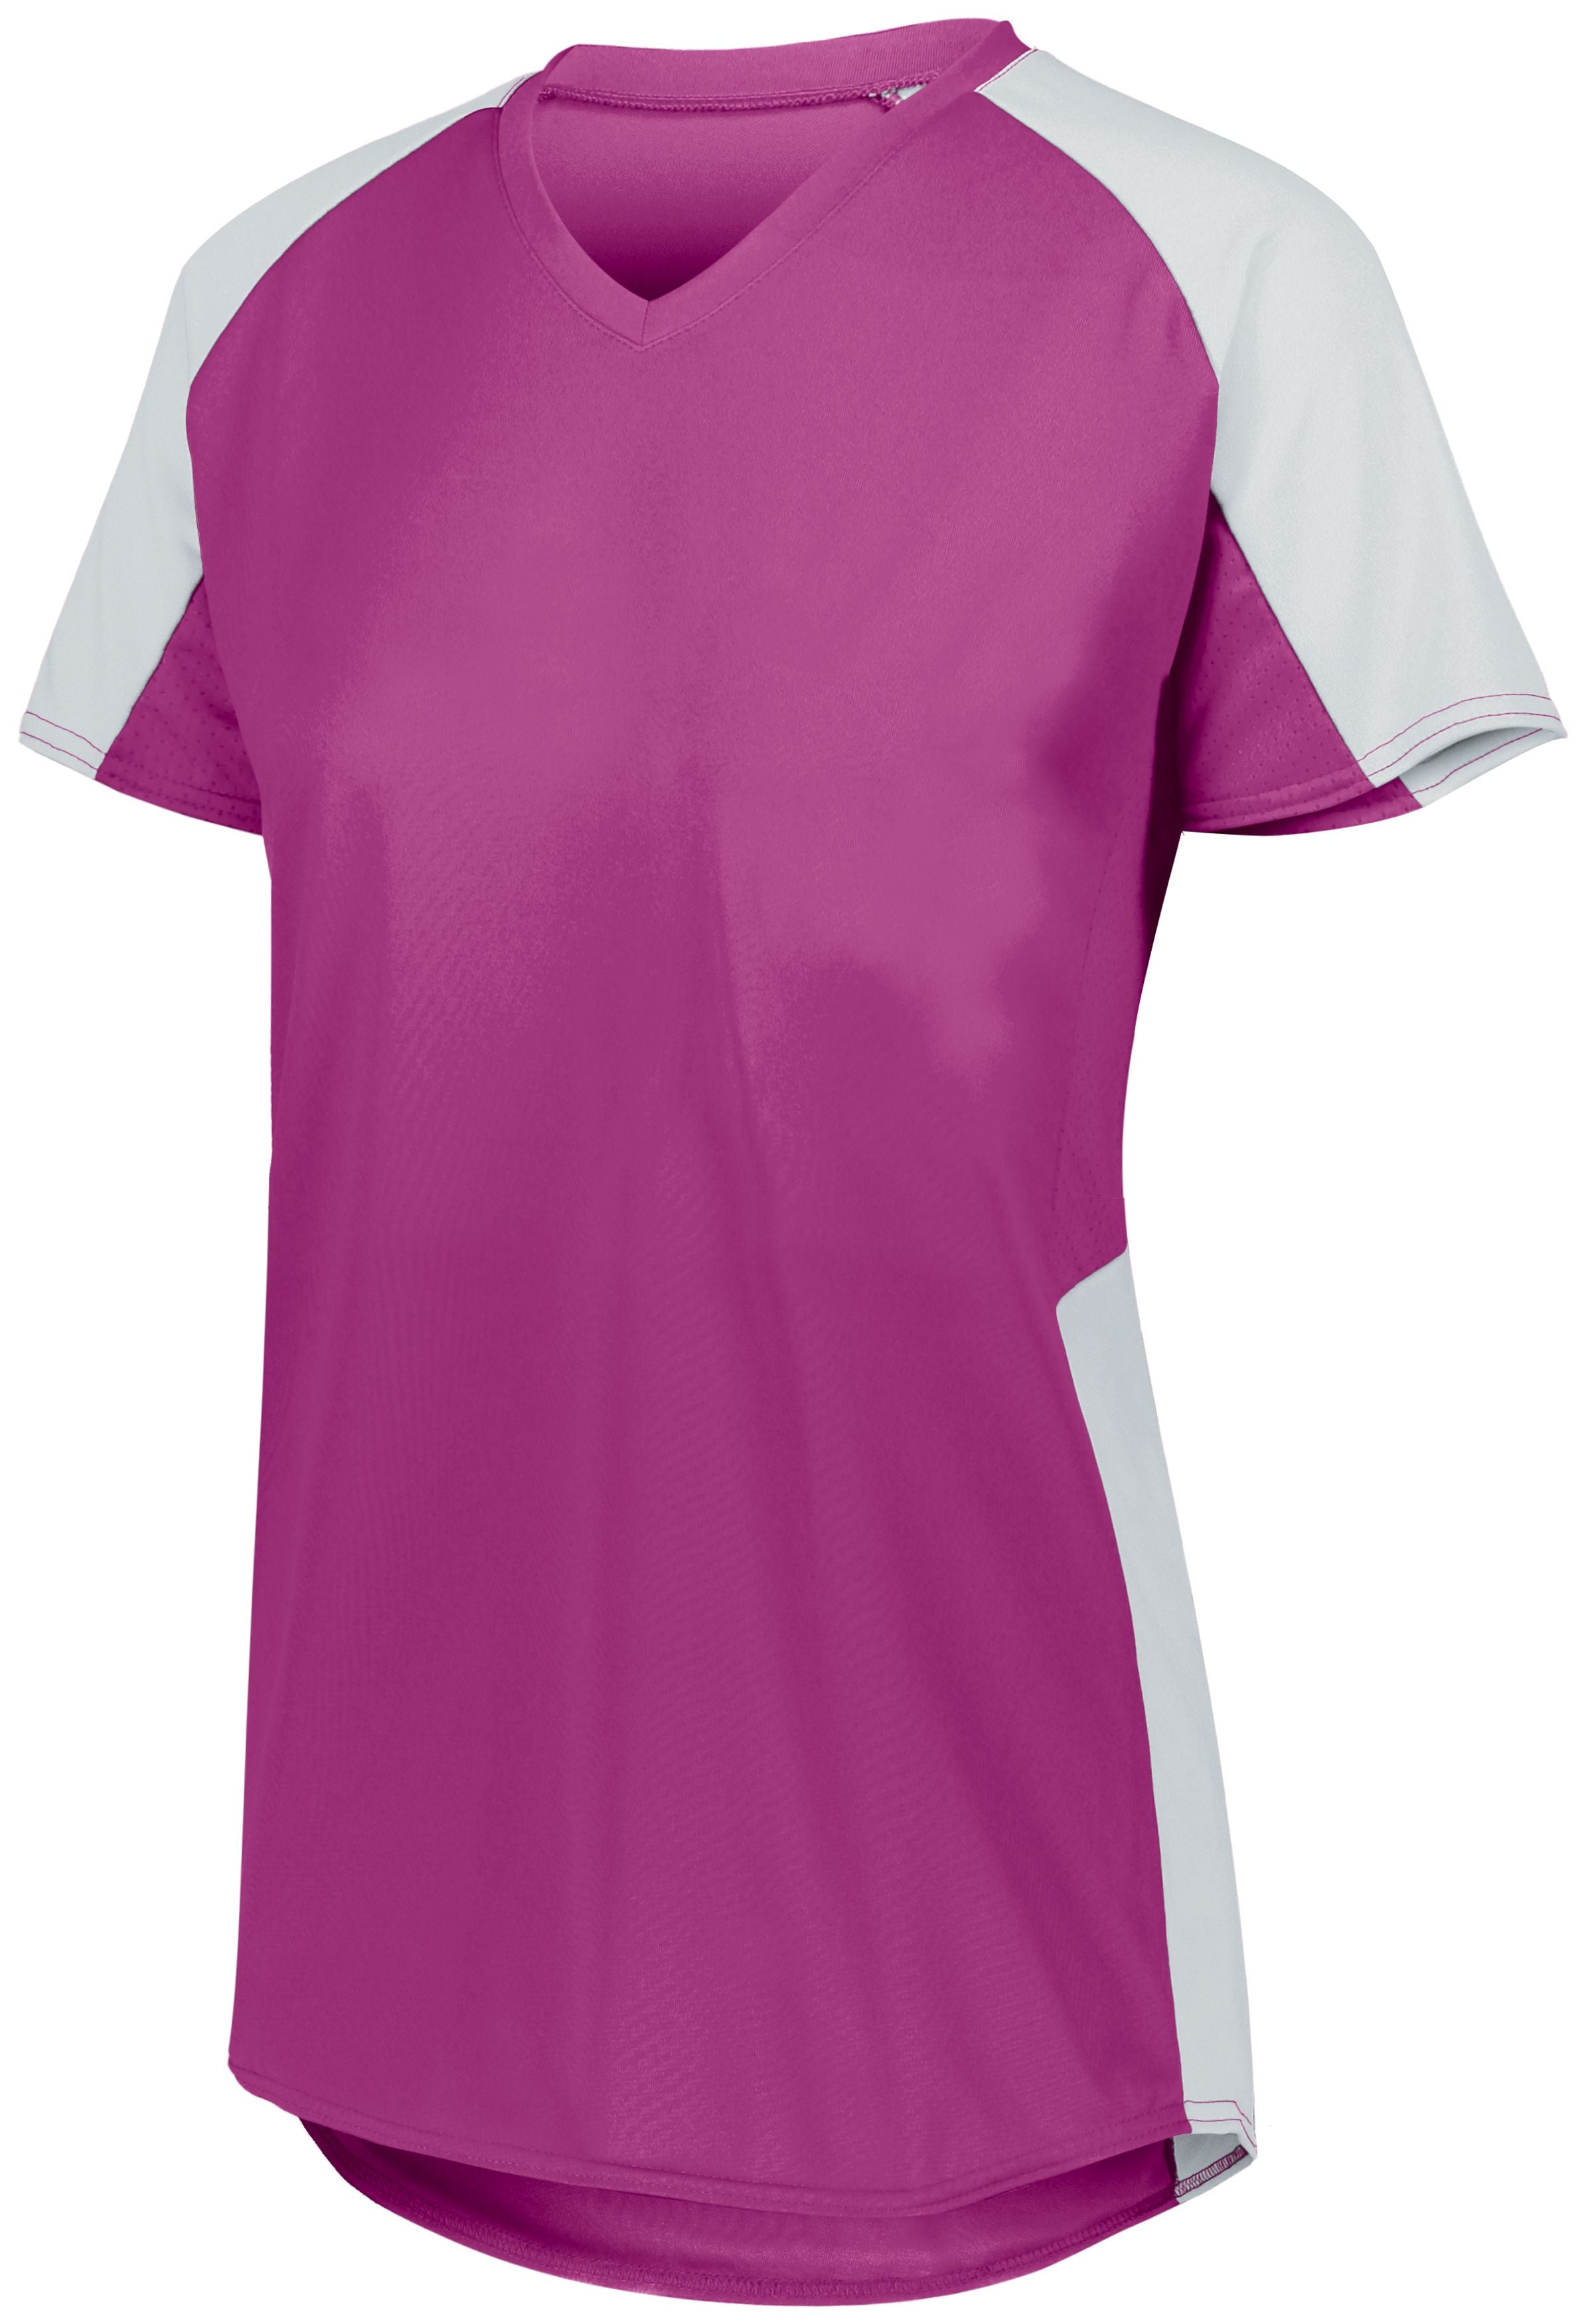 Augusta Sportswear Ladies Cutter Jersey in Power Pink/White  -Part of the Ladies, Ladies-Jersey, Augusta-Products, Softball, Shirts product lines at KanaleyCreations.com